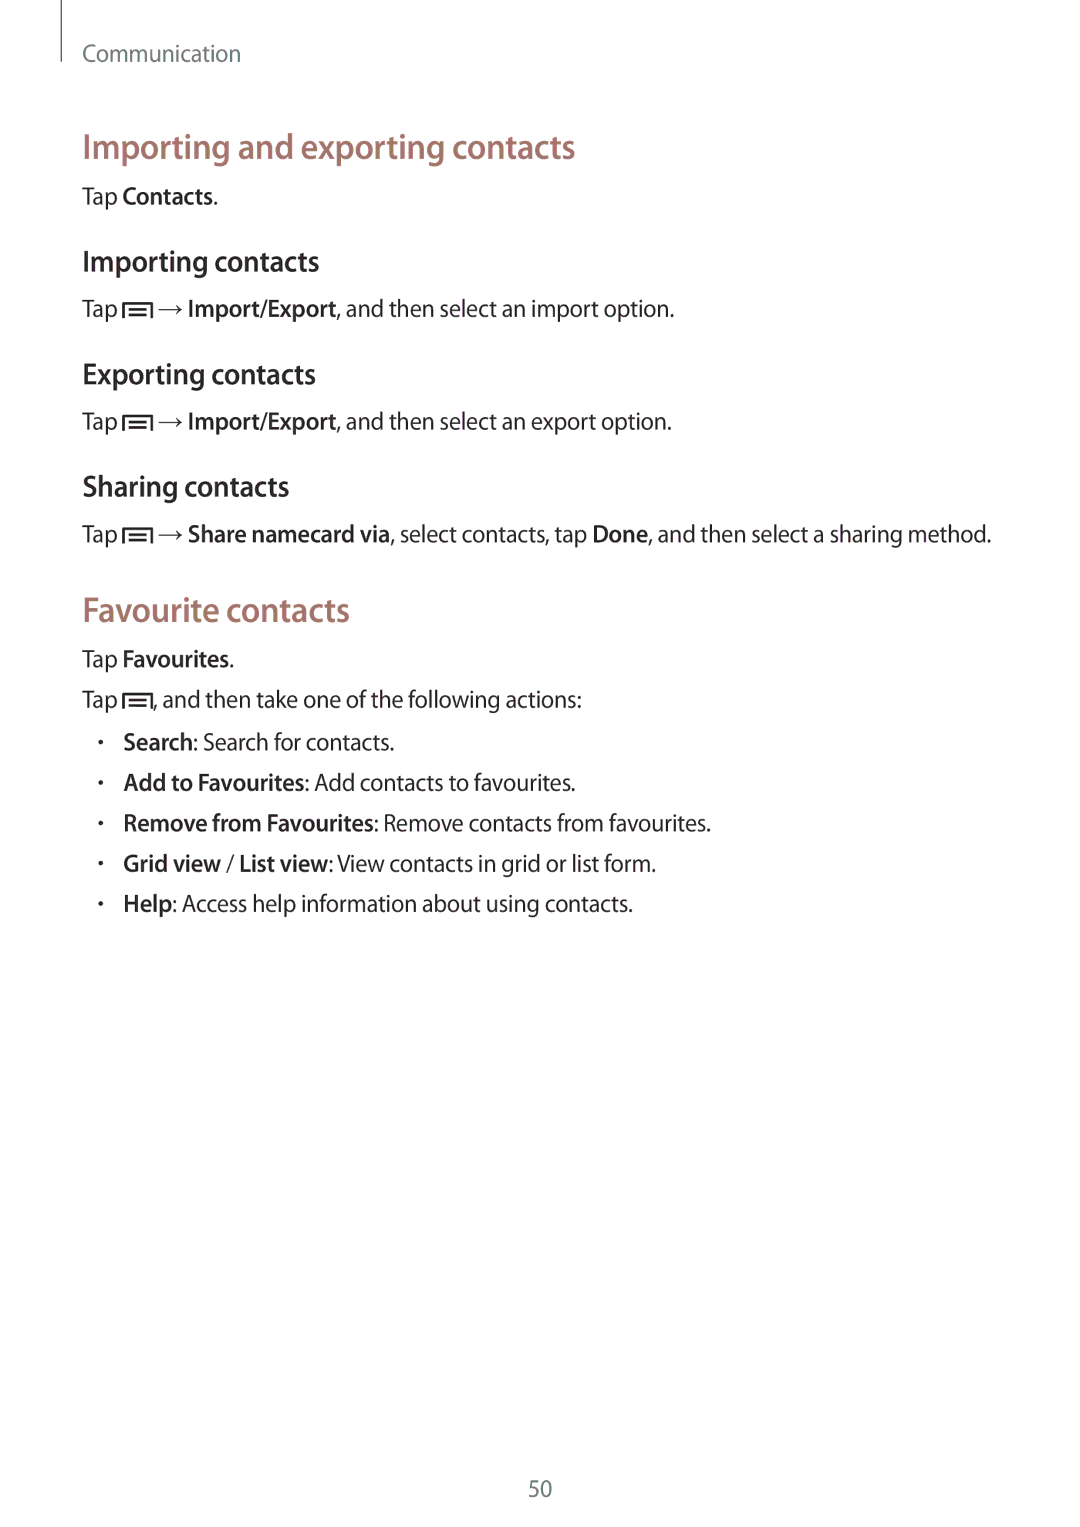 Samsung SM-G386FZWAITV manual Importing and exporting contacts, Favourite contacts, Importing contacts, Exporting contacts 